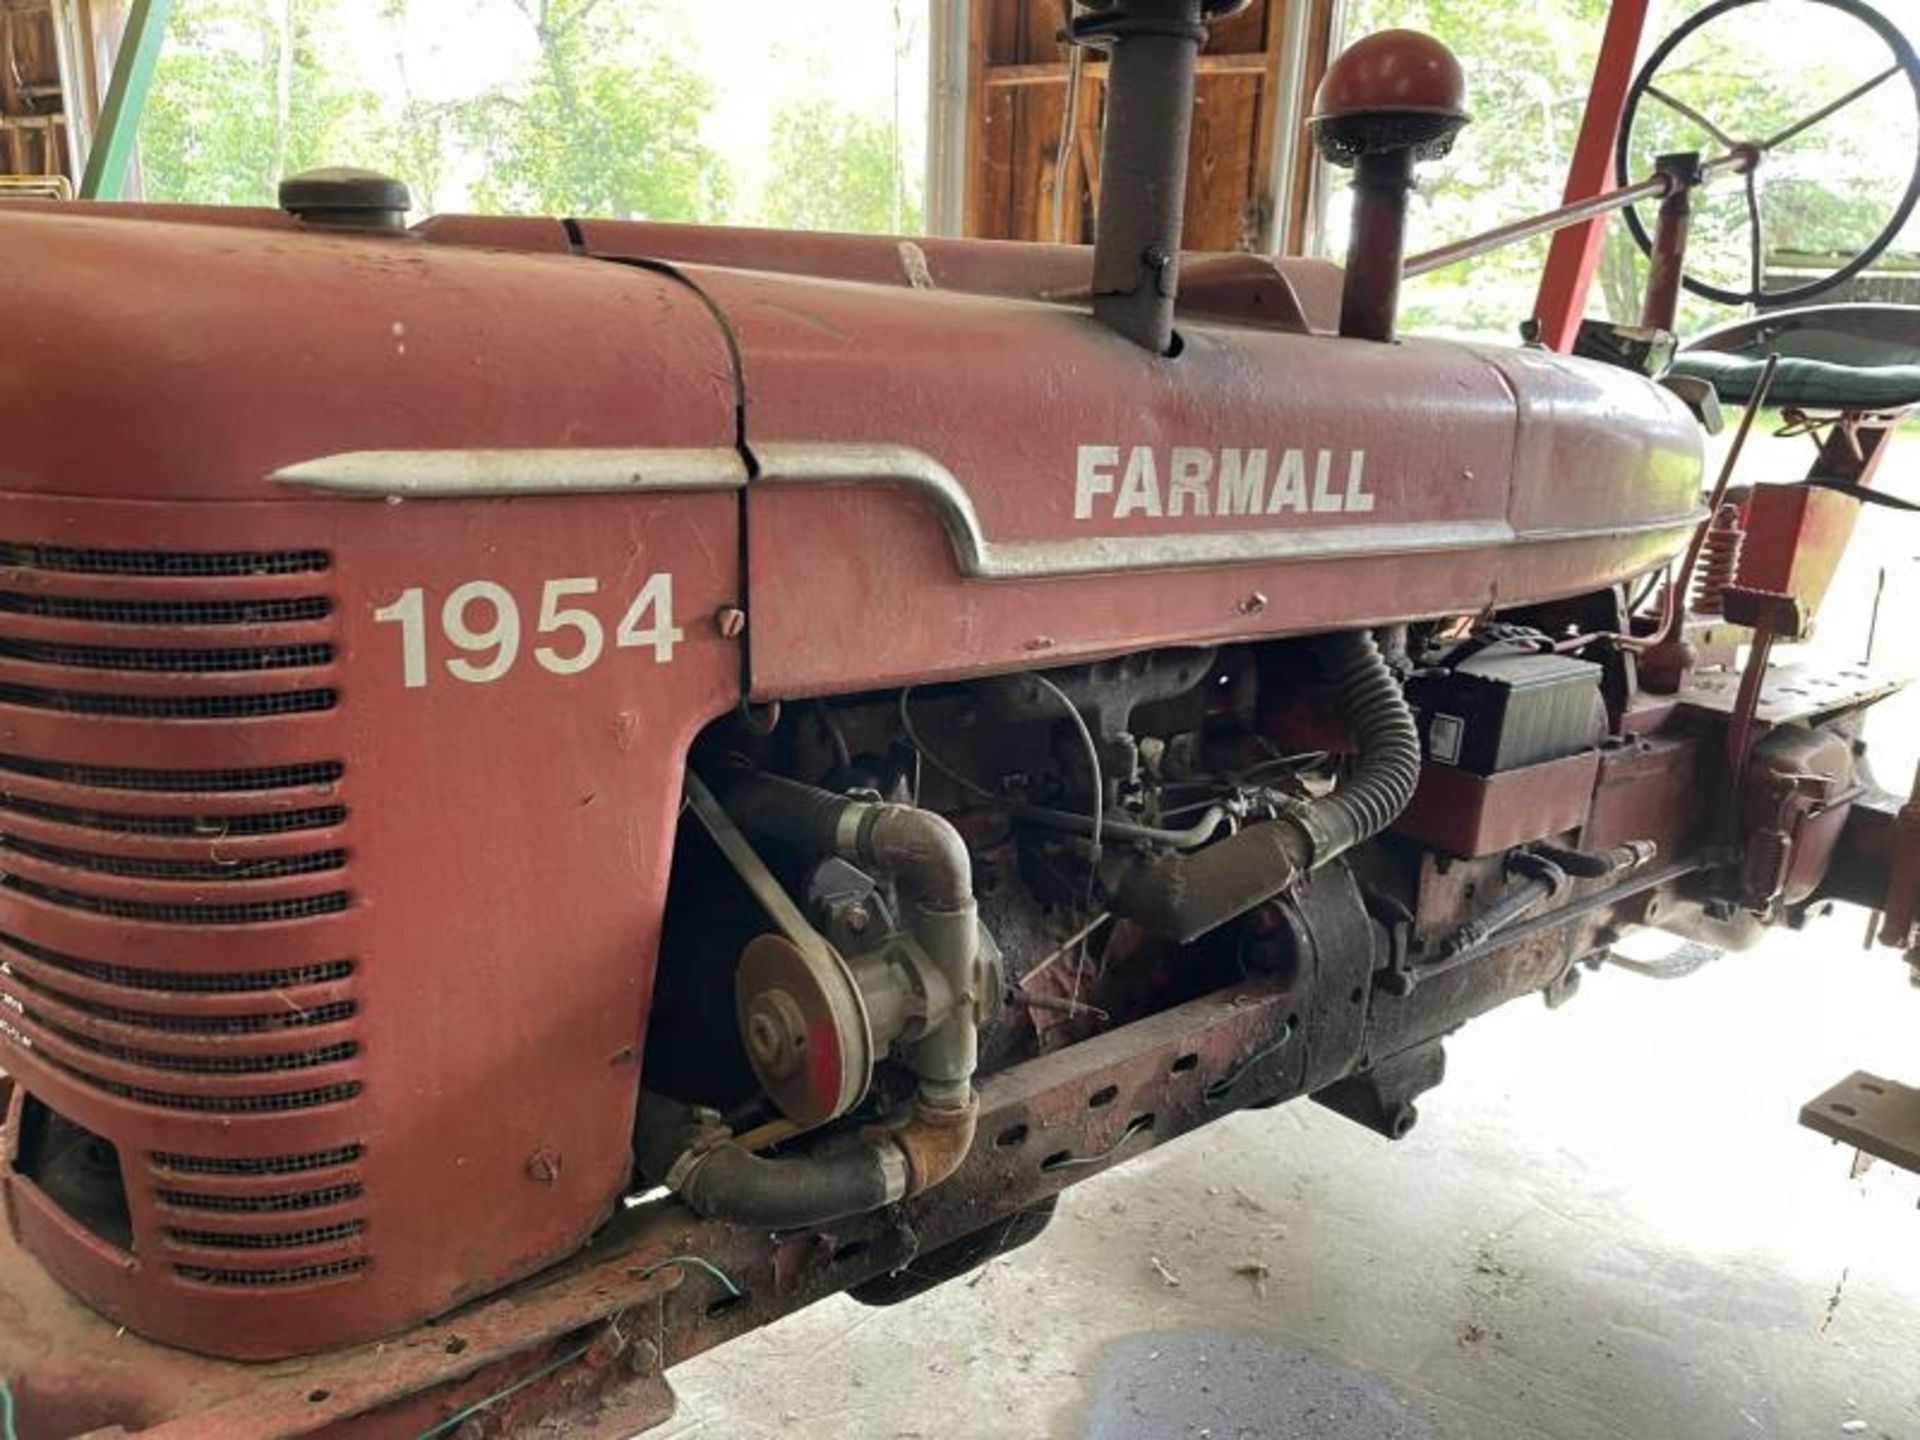 Farmall Tractor Believed To Be 1954, Row-CropFarmall Tractor Believed To Be 1954, Row-Crop - Image 8 of 35